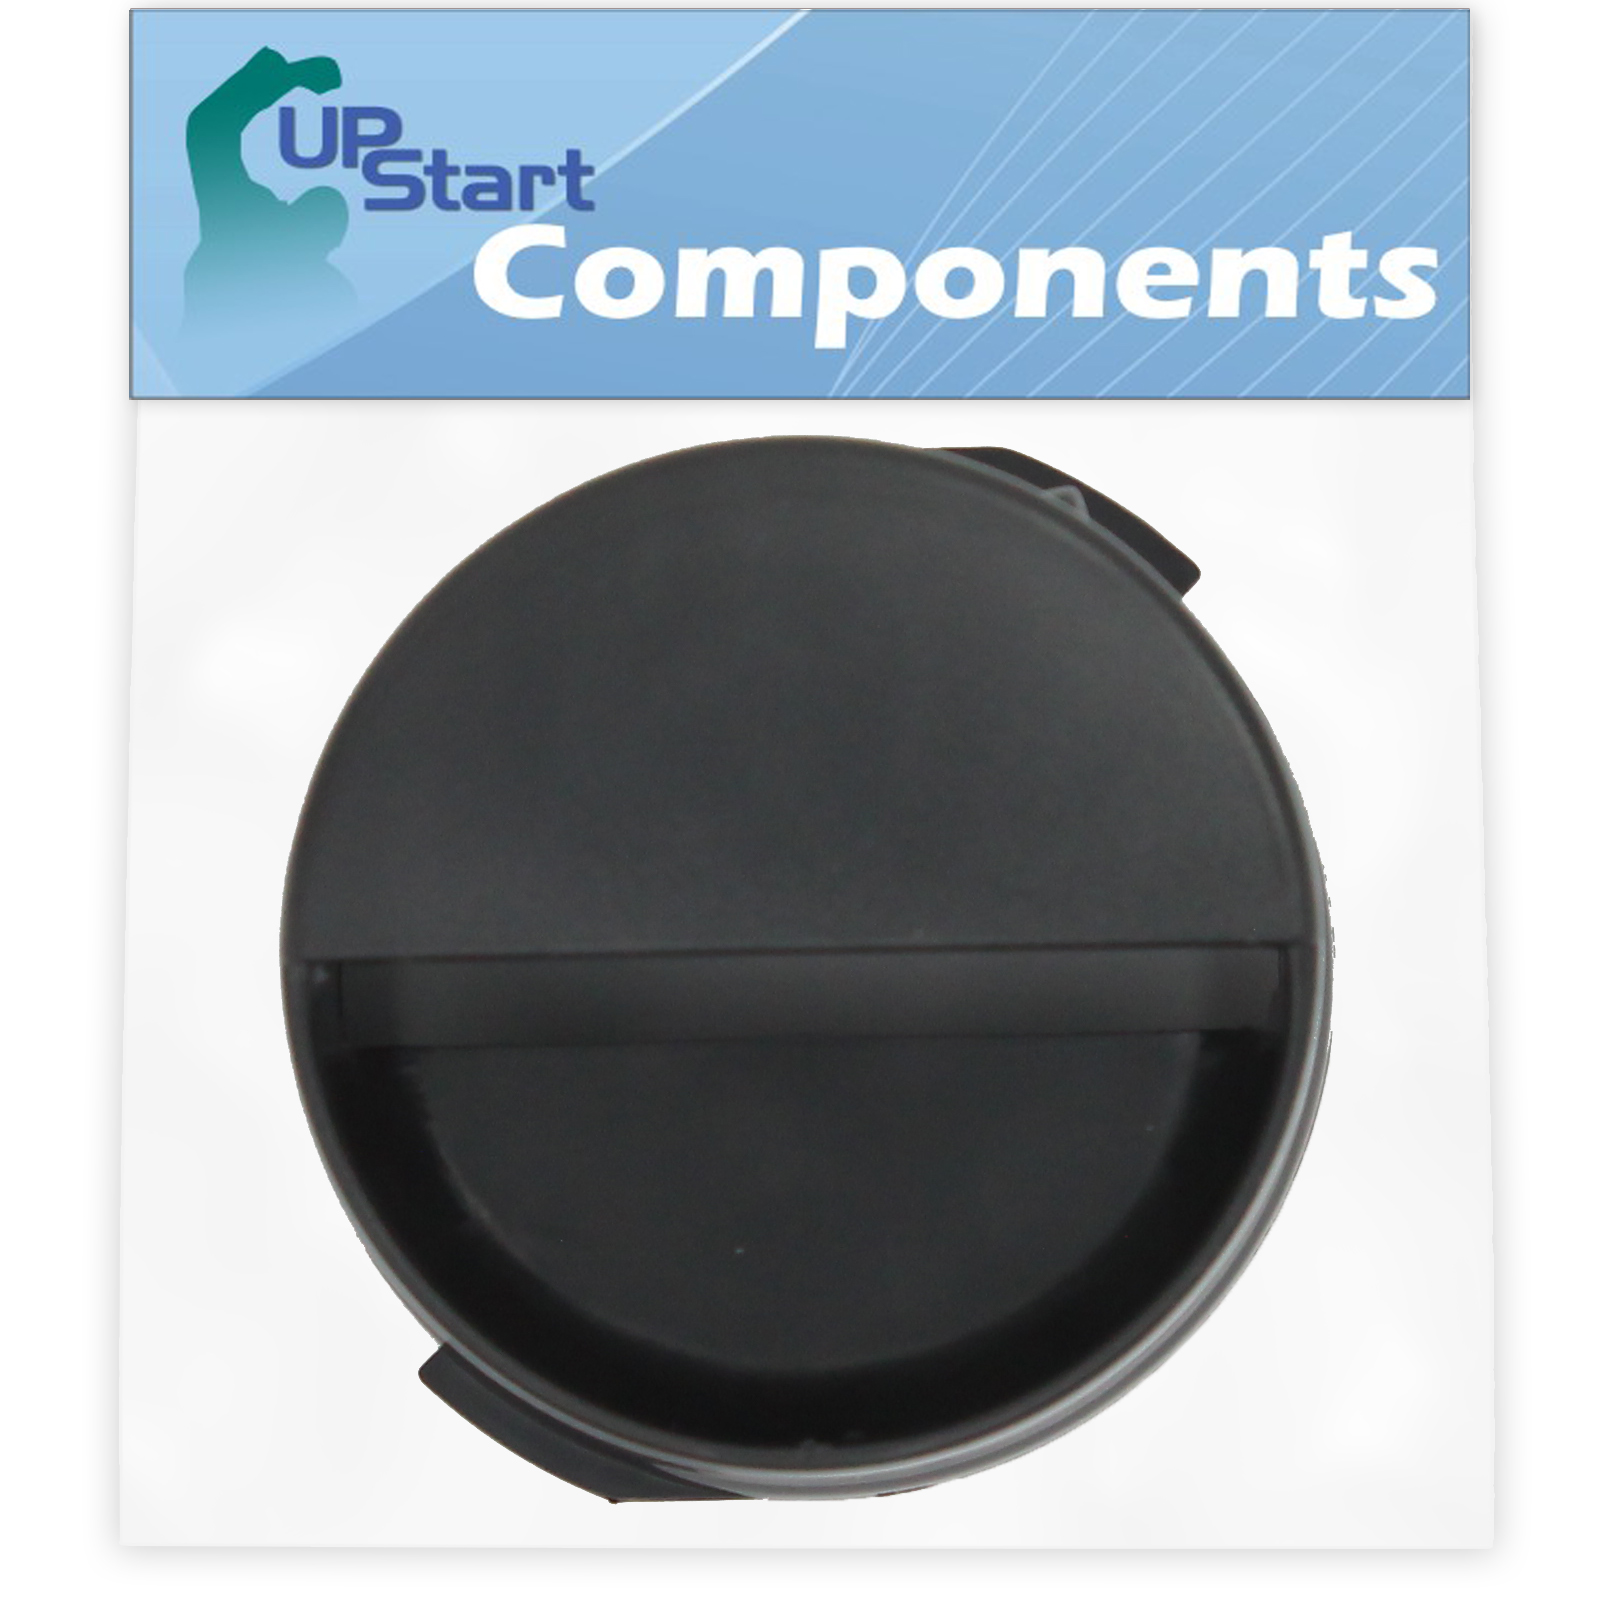 2260502B Refrigerator Water Filter Cap Replacement for Kenmore / Sears 10656246400 Refrigerator - Compatible with WP2260518B Black Water Filter Cap - UpStart Components Brand - image 1 of 4